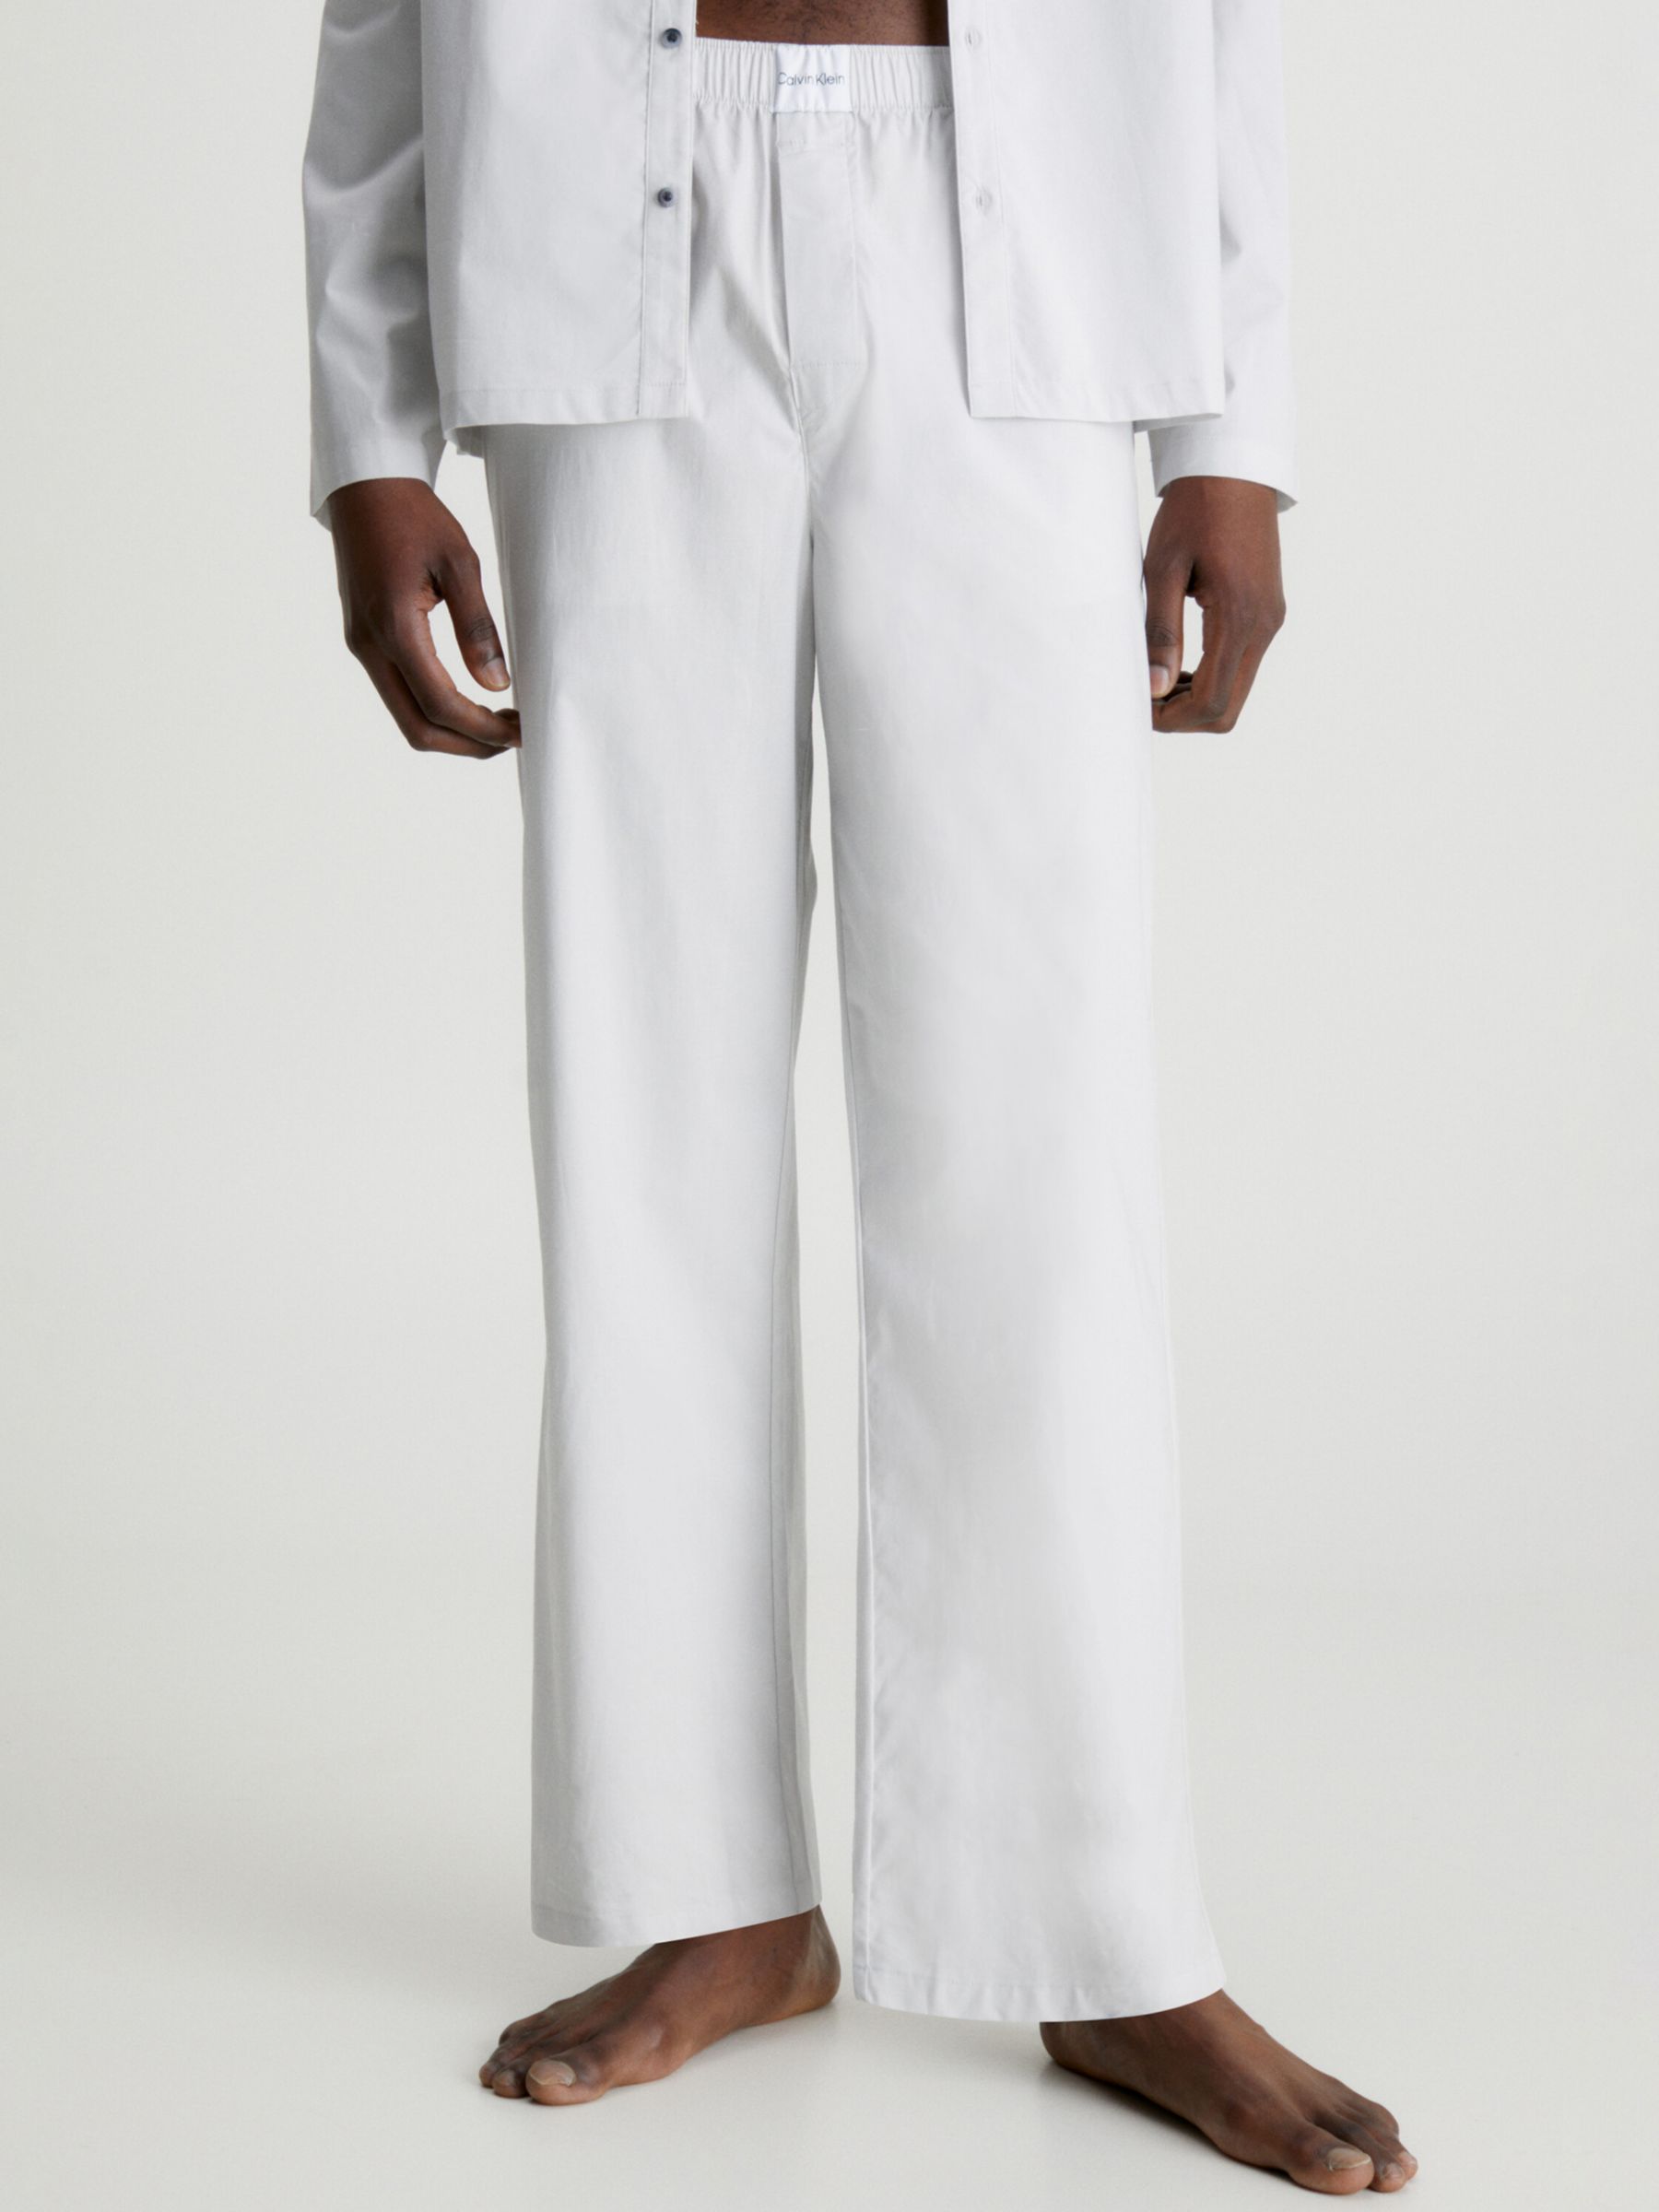 Buy Calvin Klein Pure Cotton Sleep Trousers Online at johnlewis.com